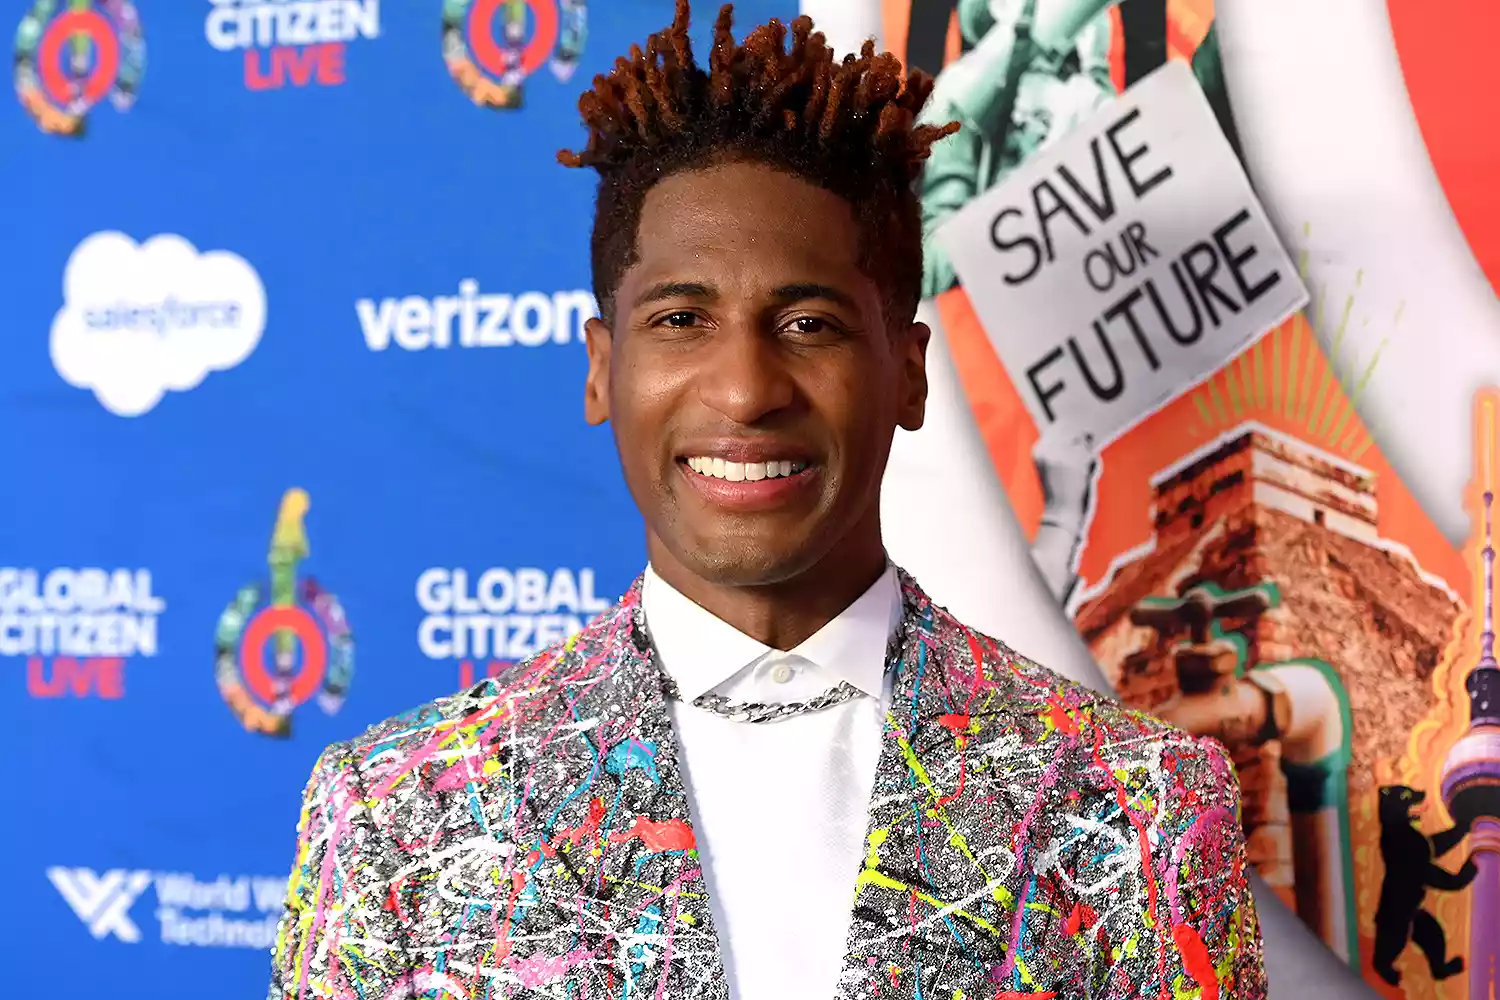 Jon Batiste Biography, Age, Height, Parents, Wife, Children, Net Worth, Nationality